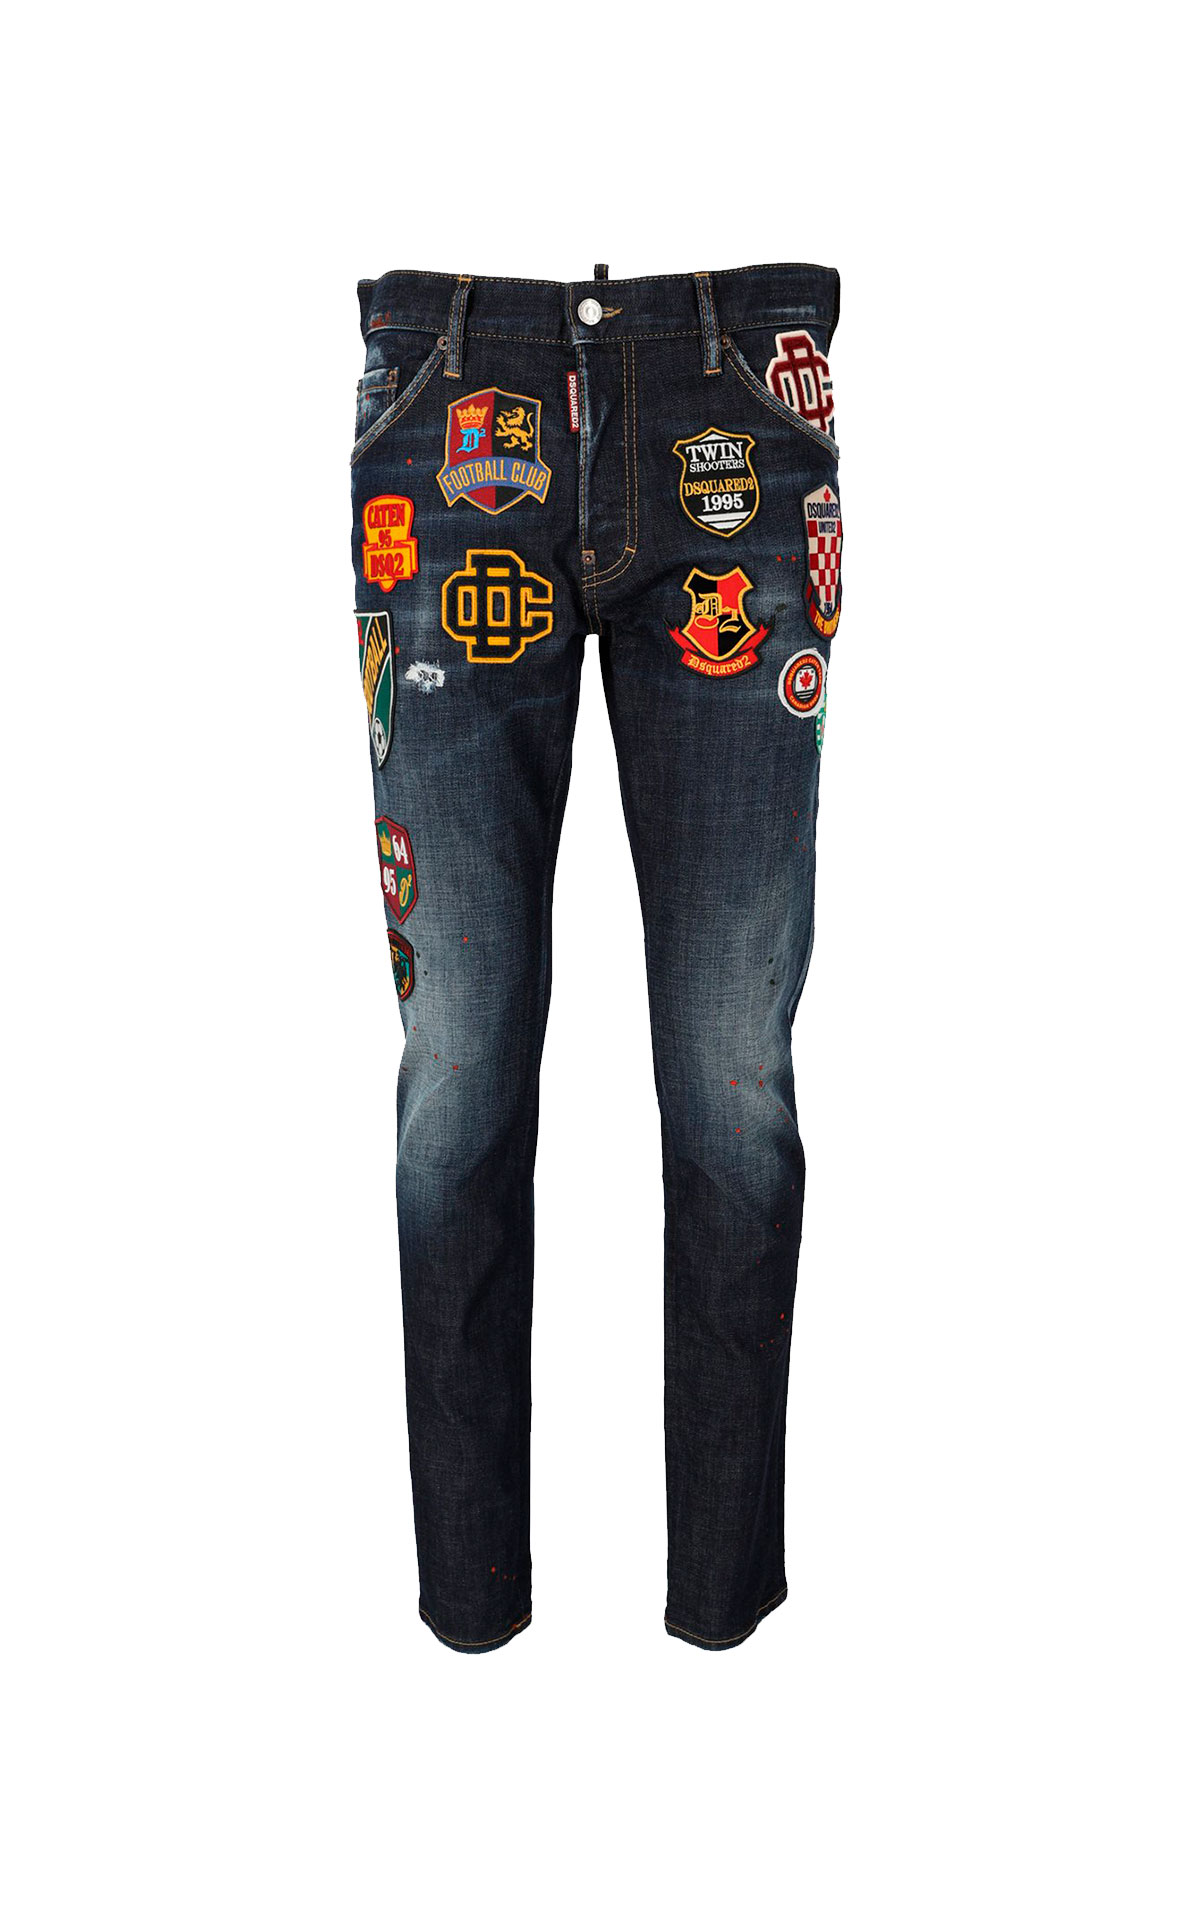 Jeans with Dsquared2 patches